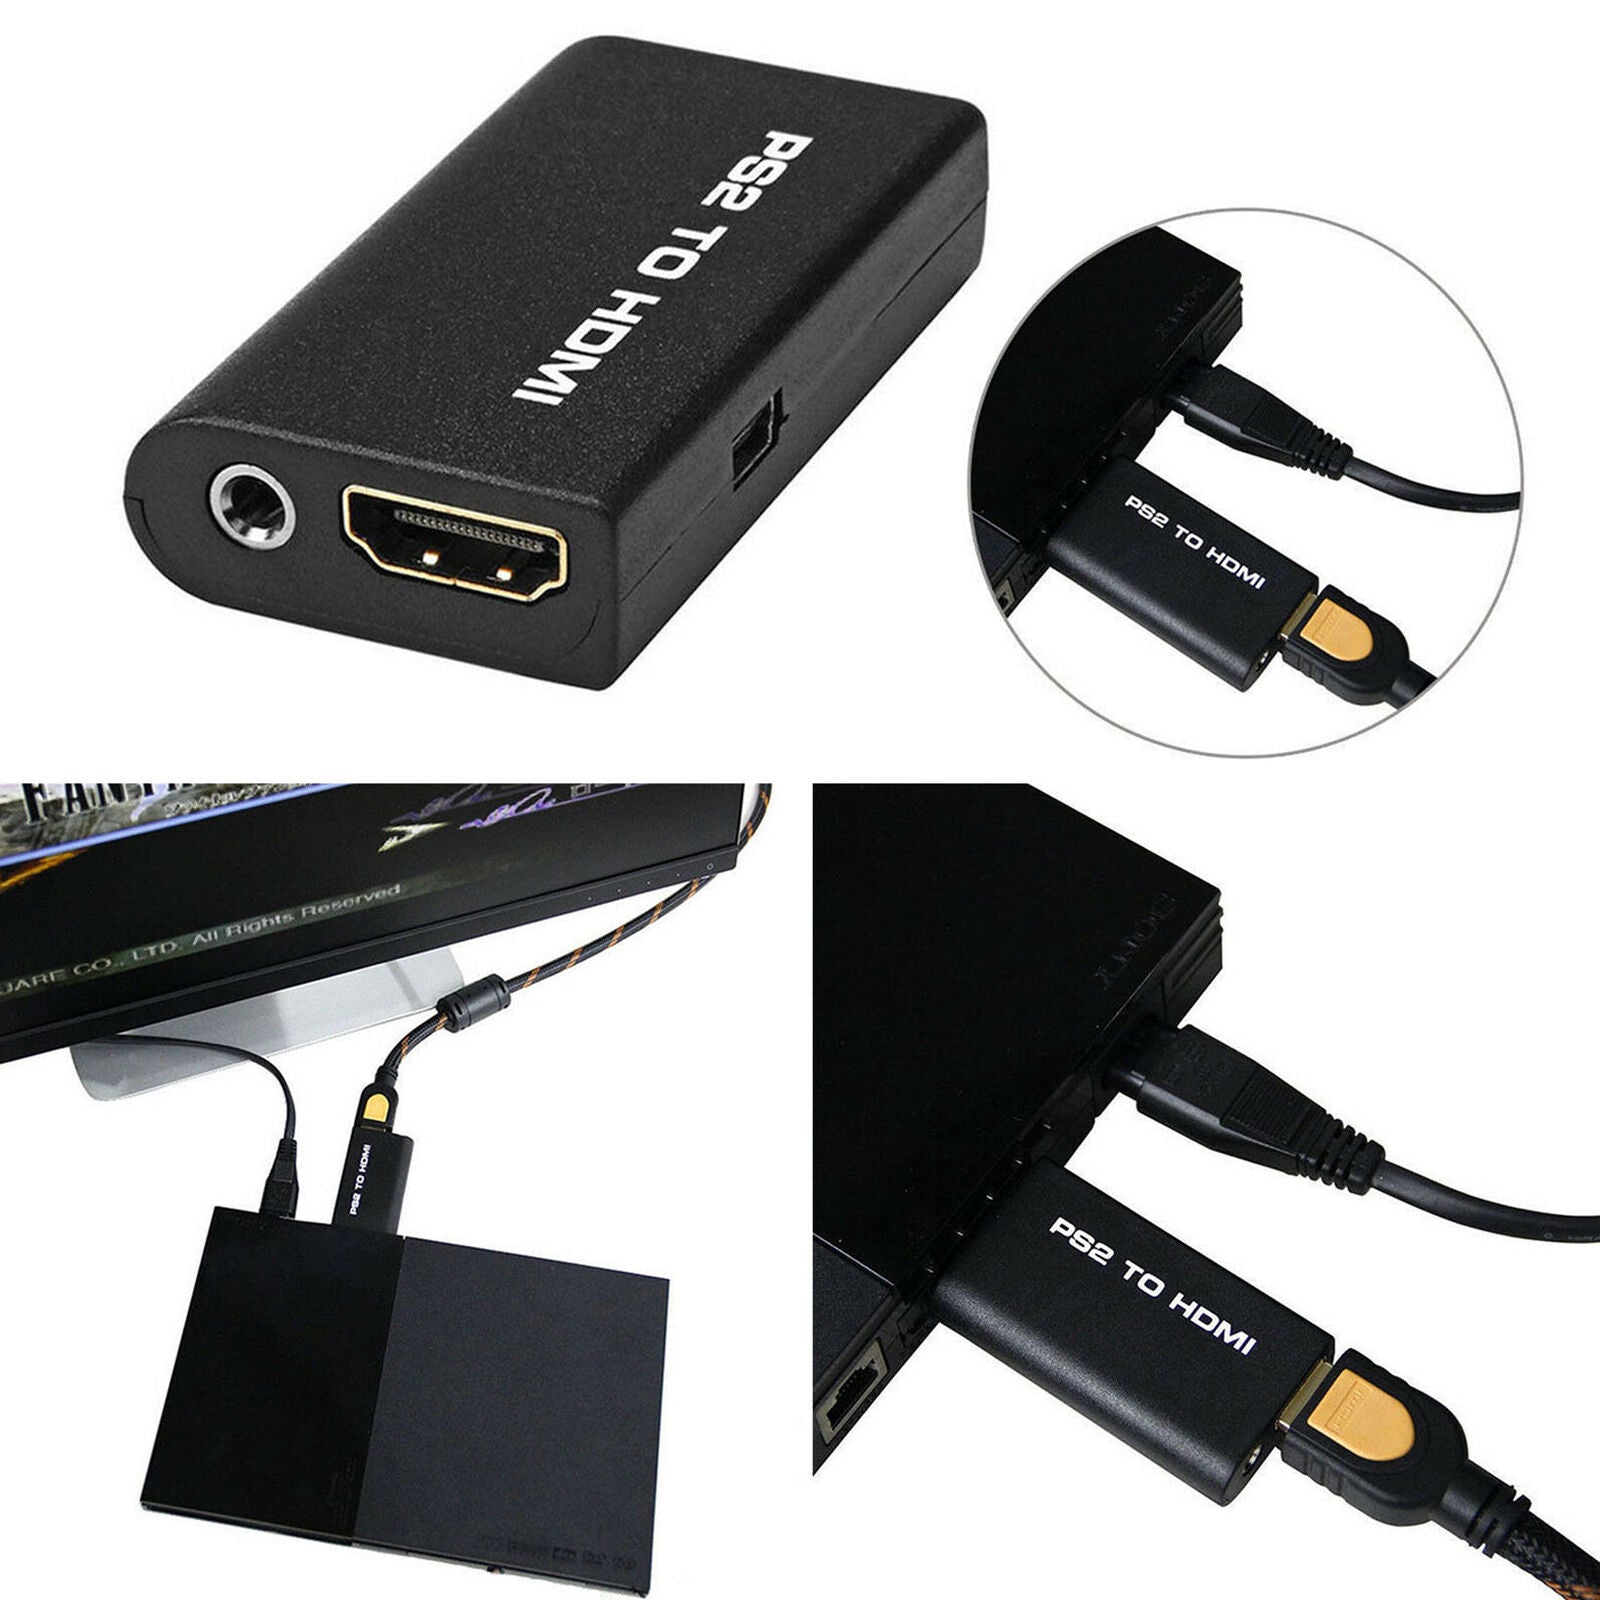 PS2 to HDMI Audio Video Cable AV Adapter Converter w/3.5mm Audio Output for HDTV